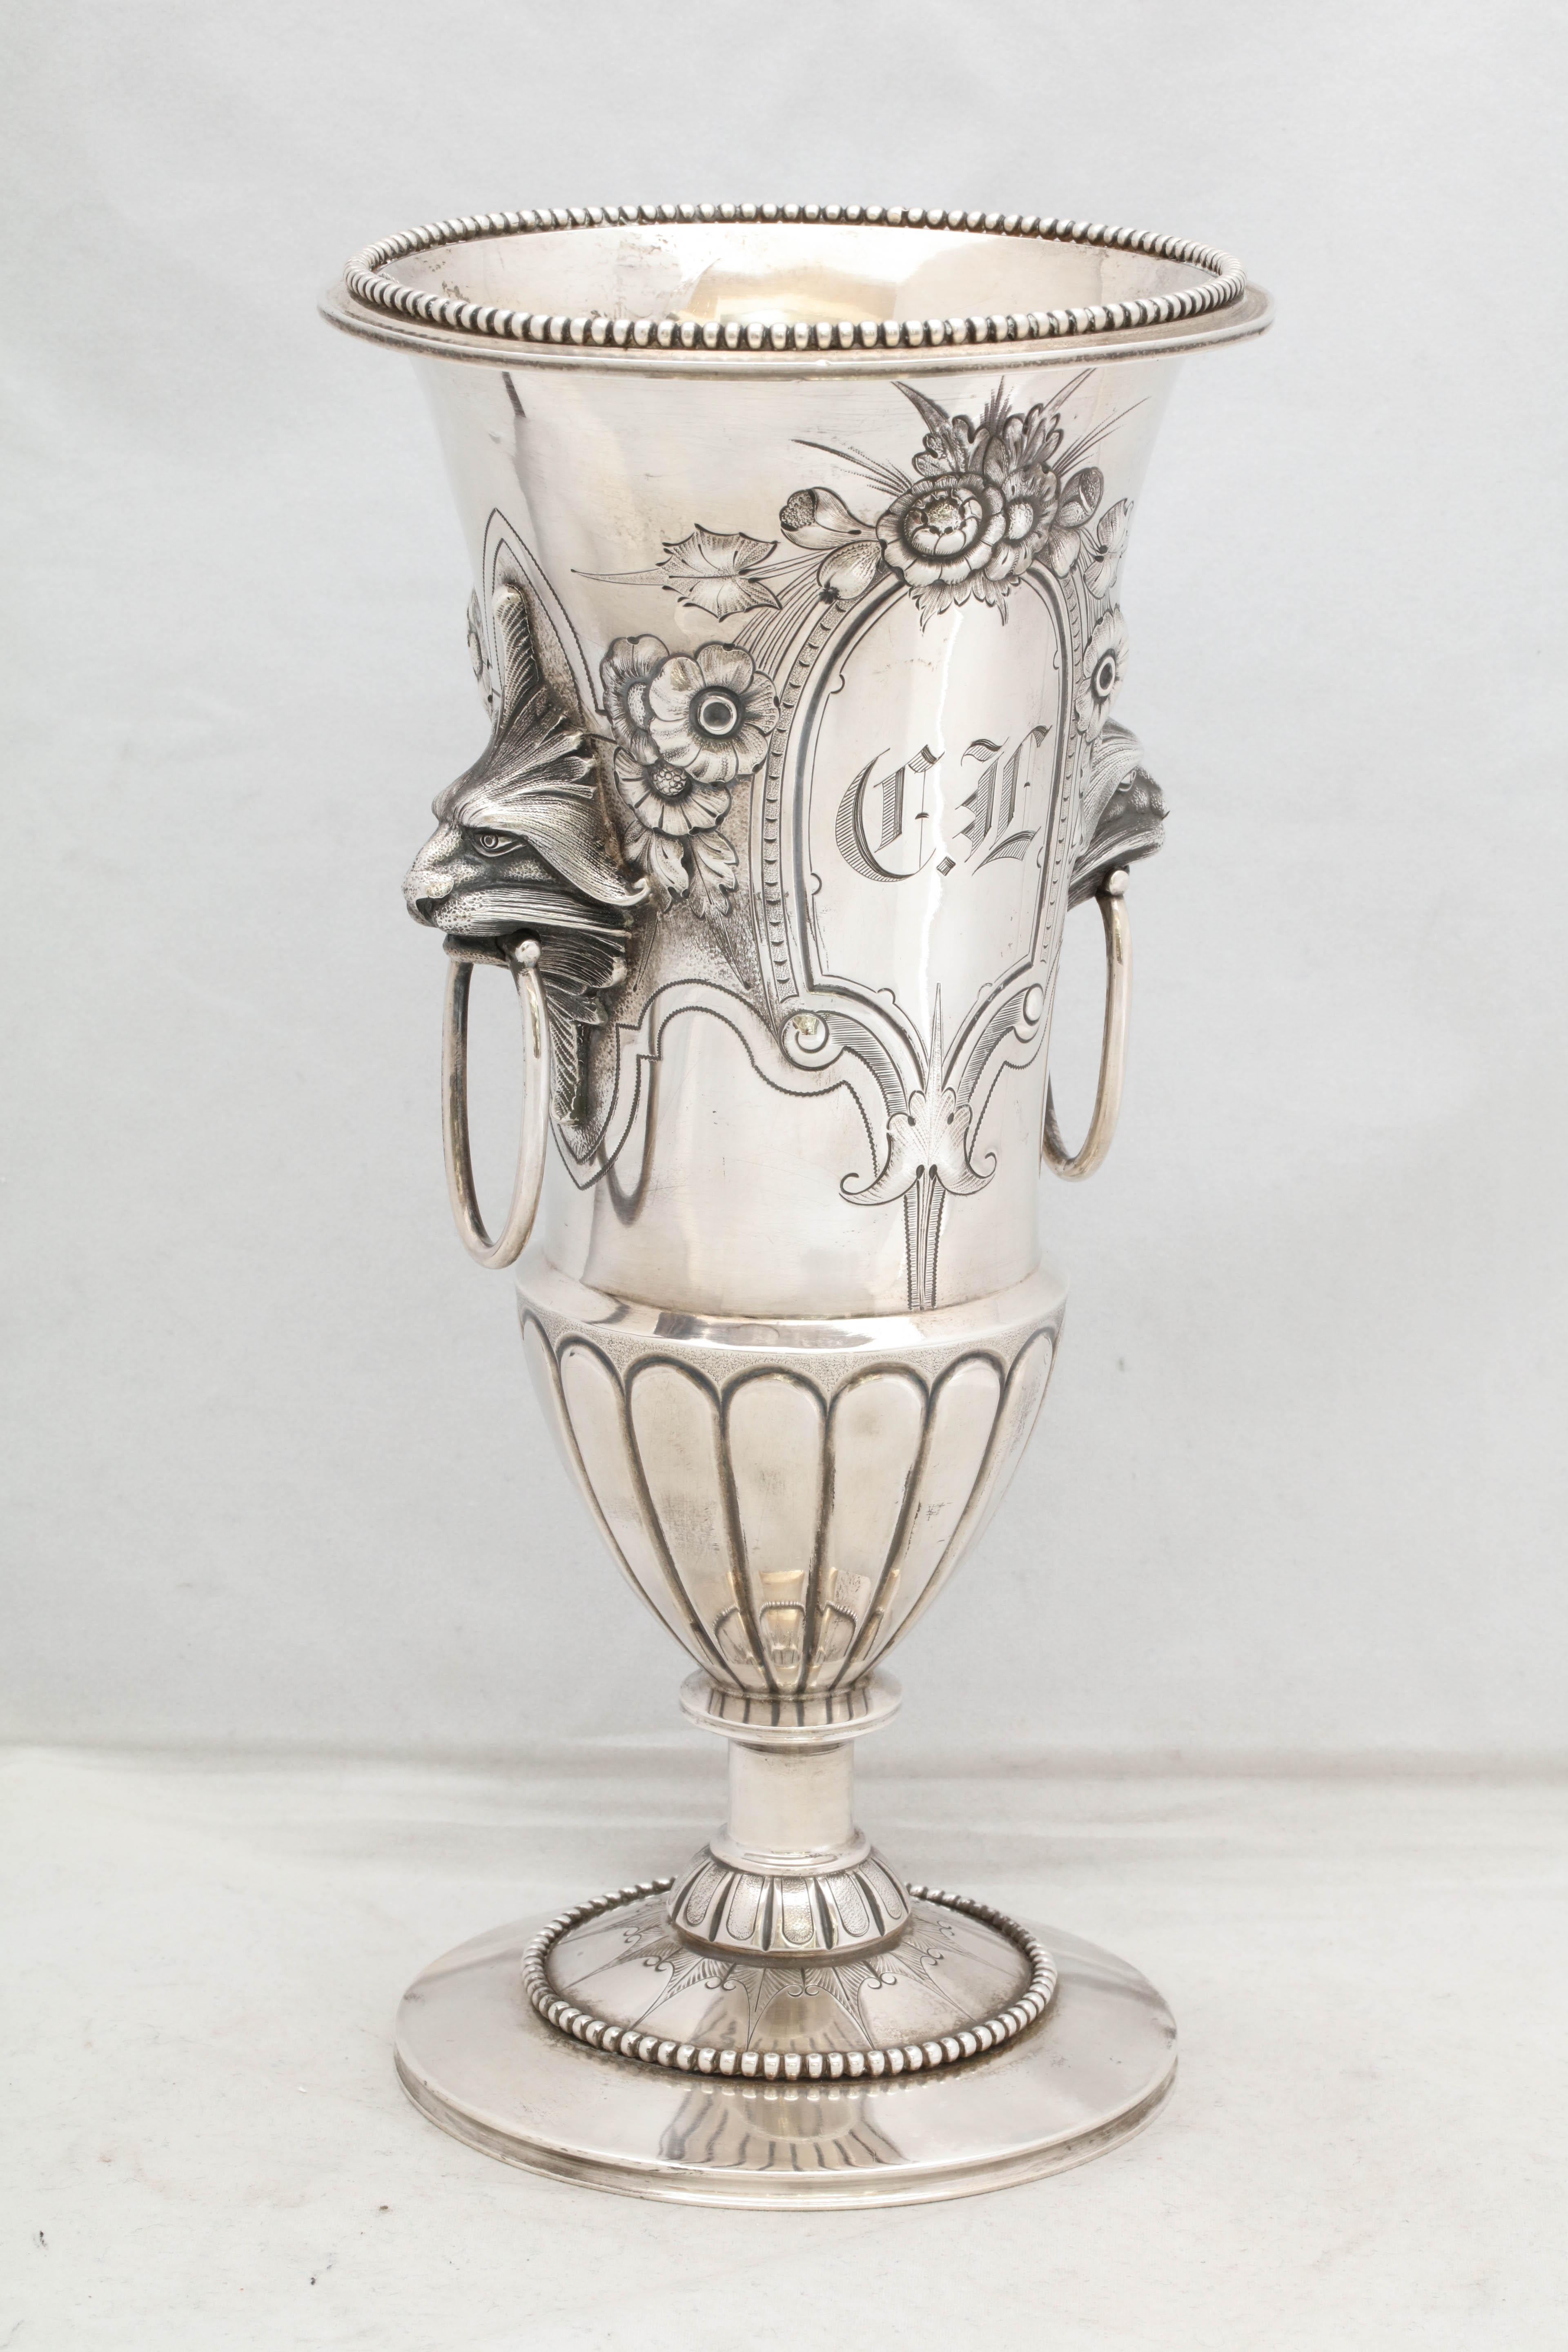 Neoclassical, coin Silver, pedestal - based vase, New York, circa 1875, Wood and Hughes - Makers. On each side of the vase, a ringed handle emanates from a lion's mouth. Vase is chased with flowers and is etched. Rim of vase is decorated with